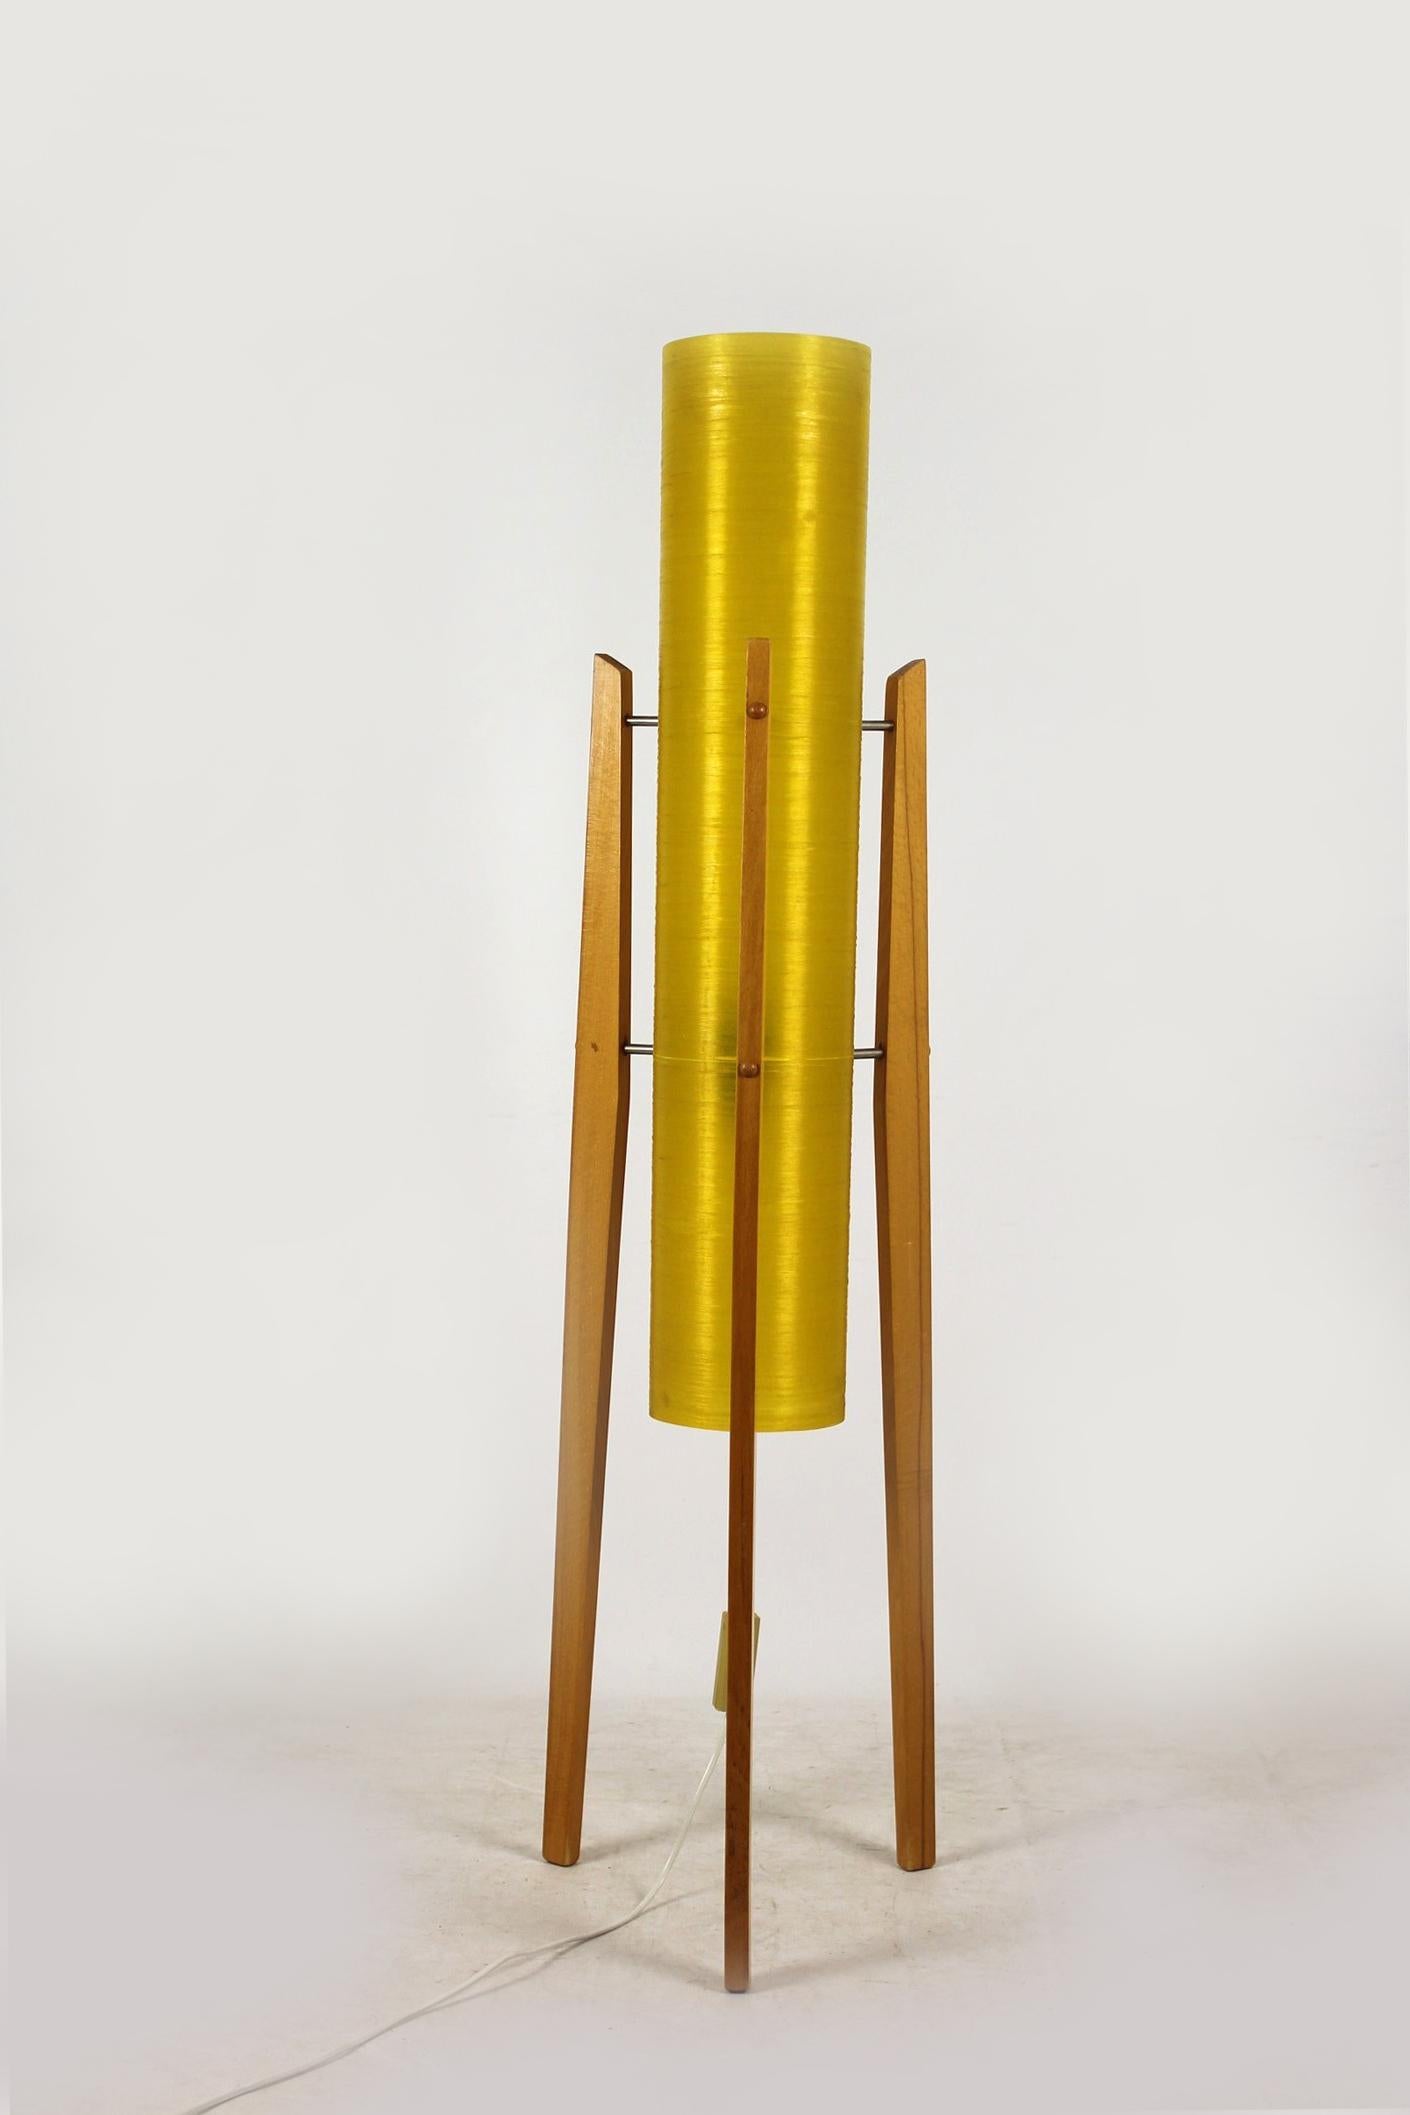 This rocket floor lamp was produced in the 1960s in Czechoslovakia. It features a yellow fiberglass shade on three wooden legs. The lamp is fully functional and requires one bulb.